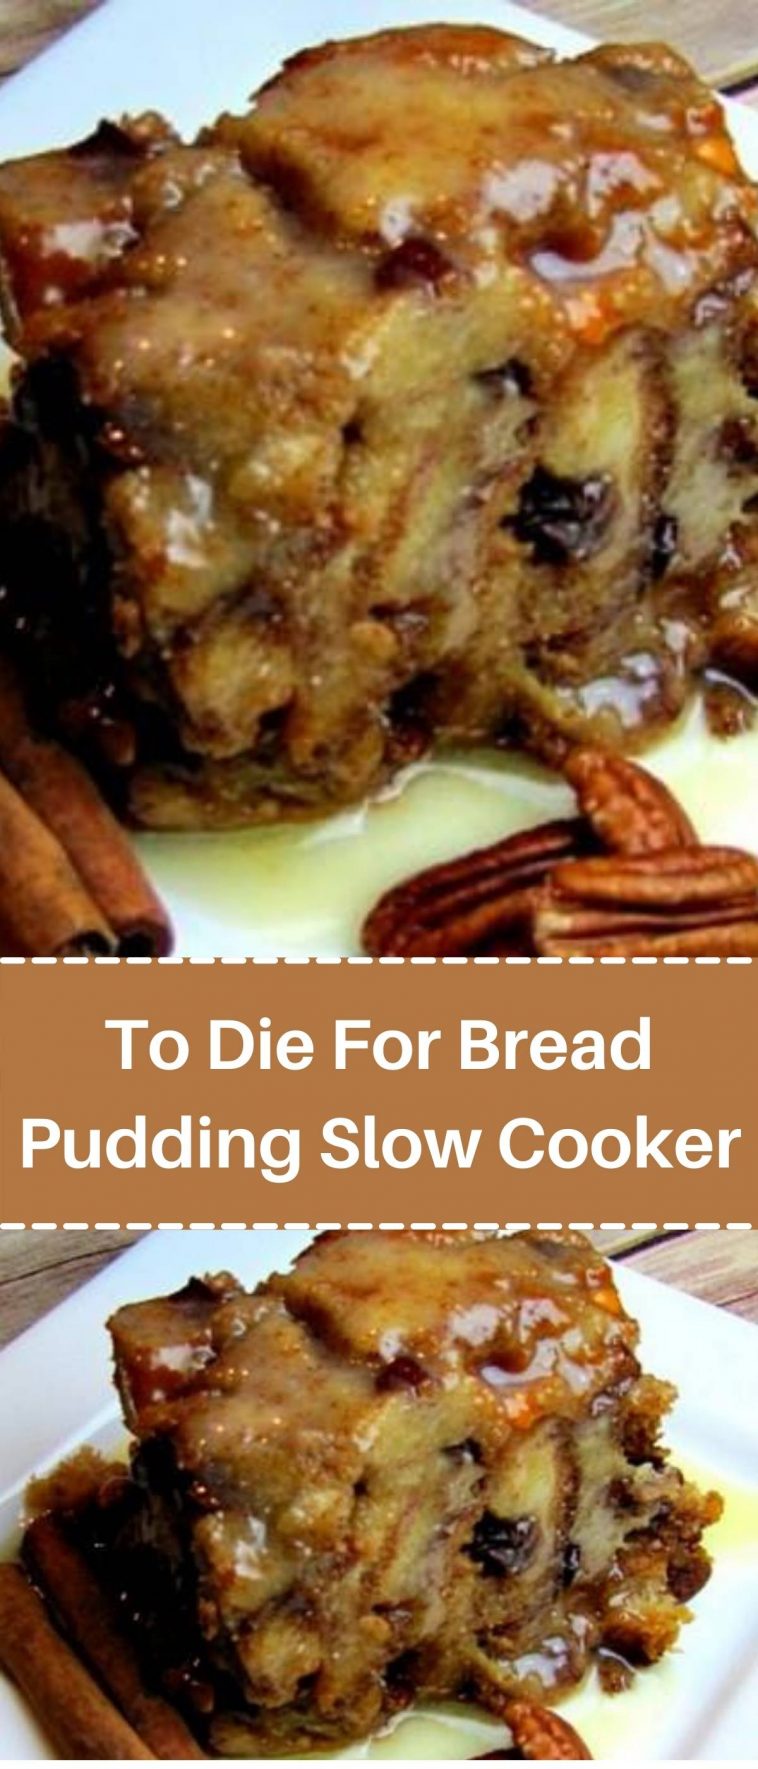 To Die For Bread Pudding Slow Cooker Recipe